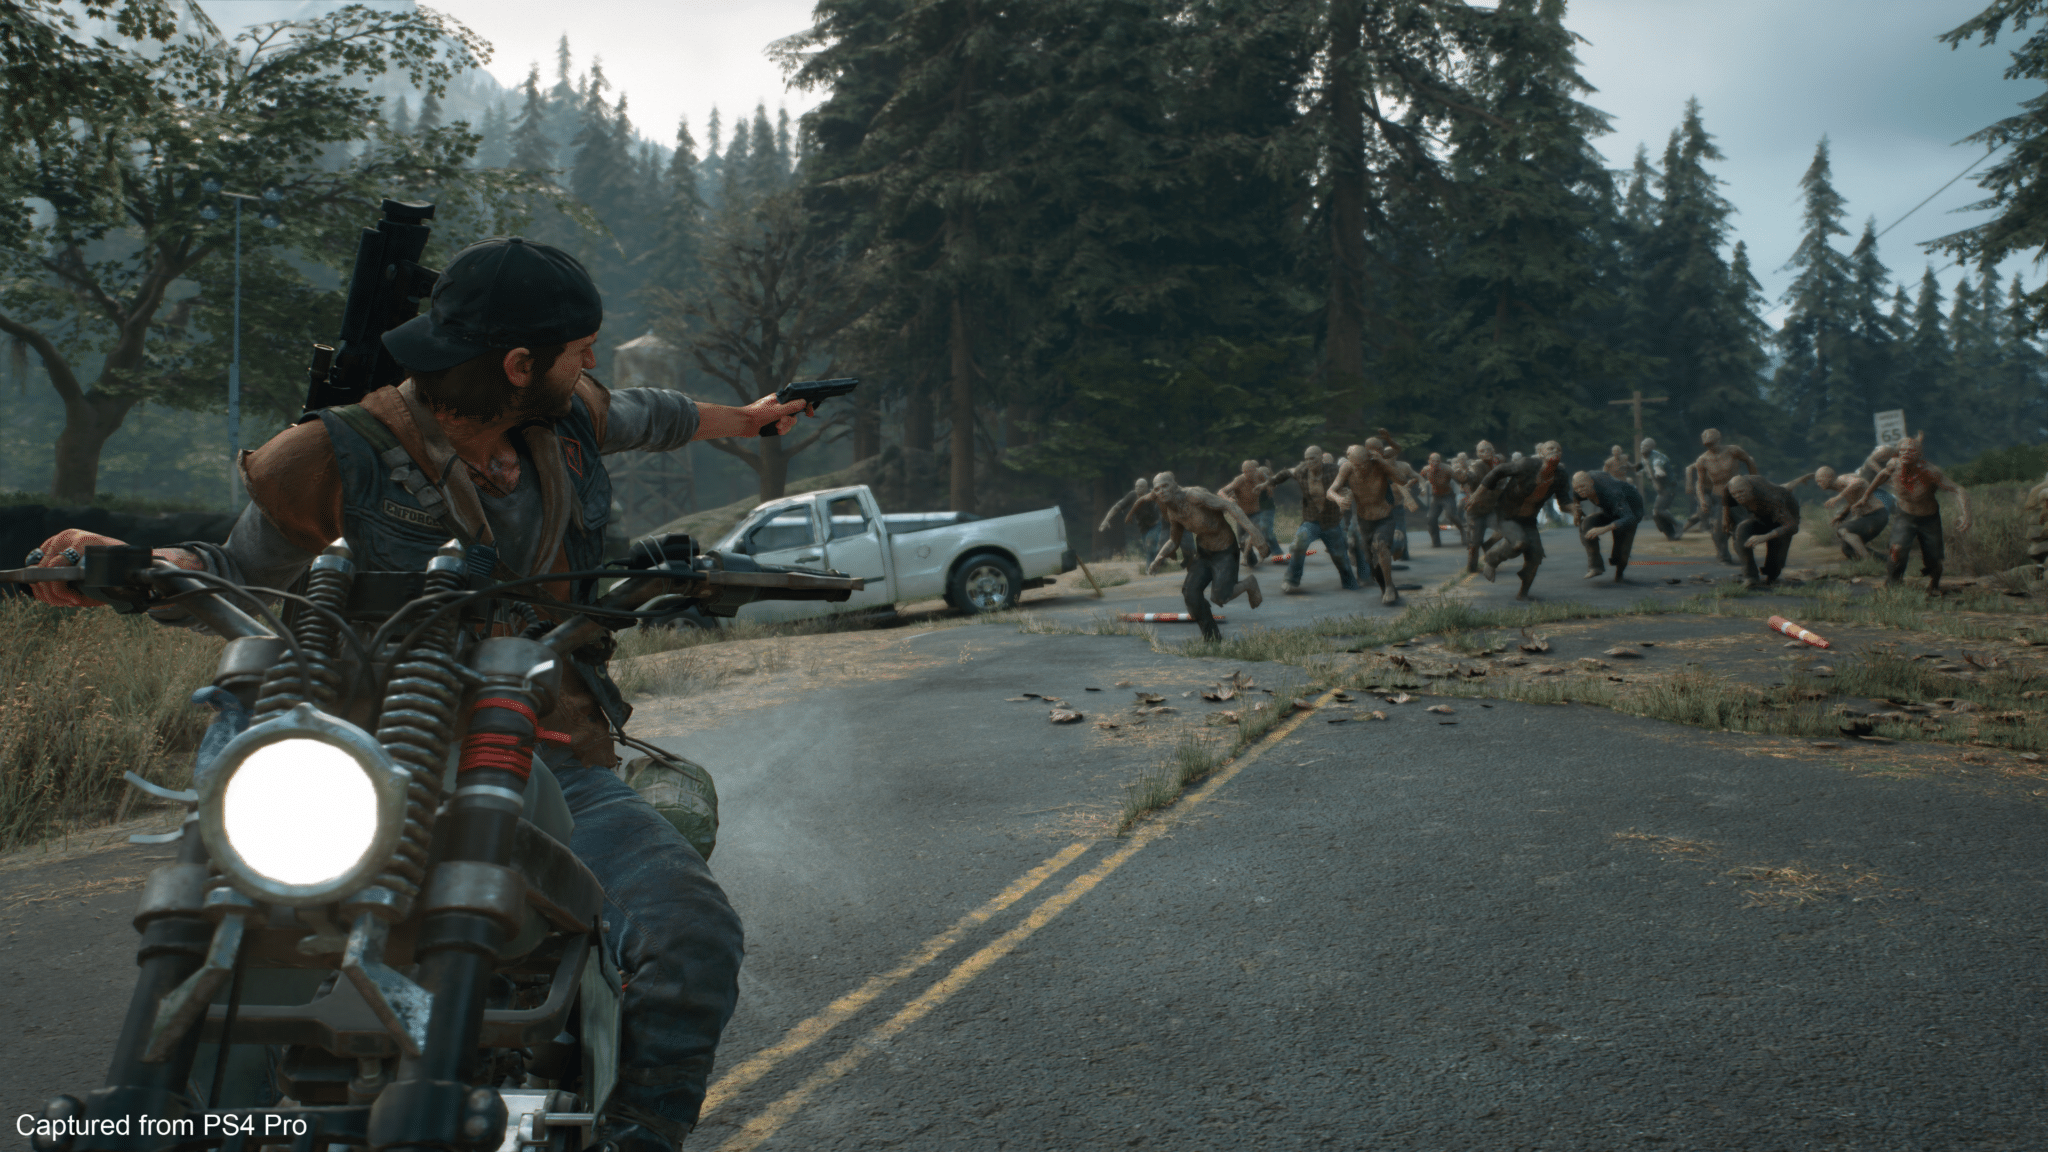 Over 100,000 fans join hands to demand Days Gone 2 from Sony -   News